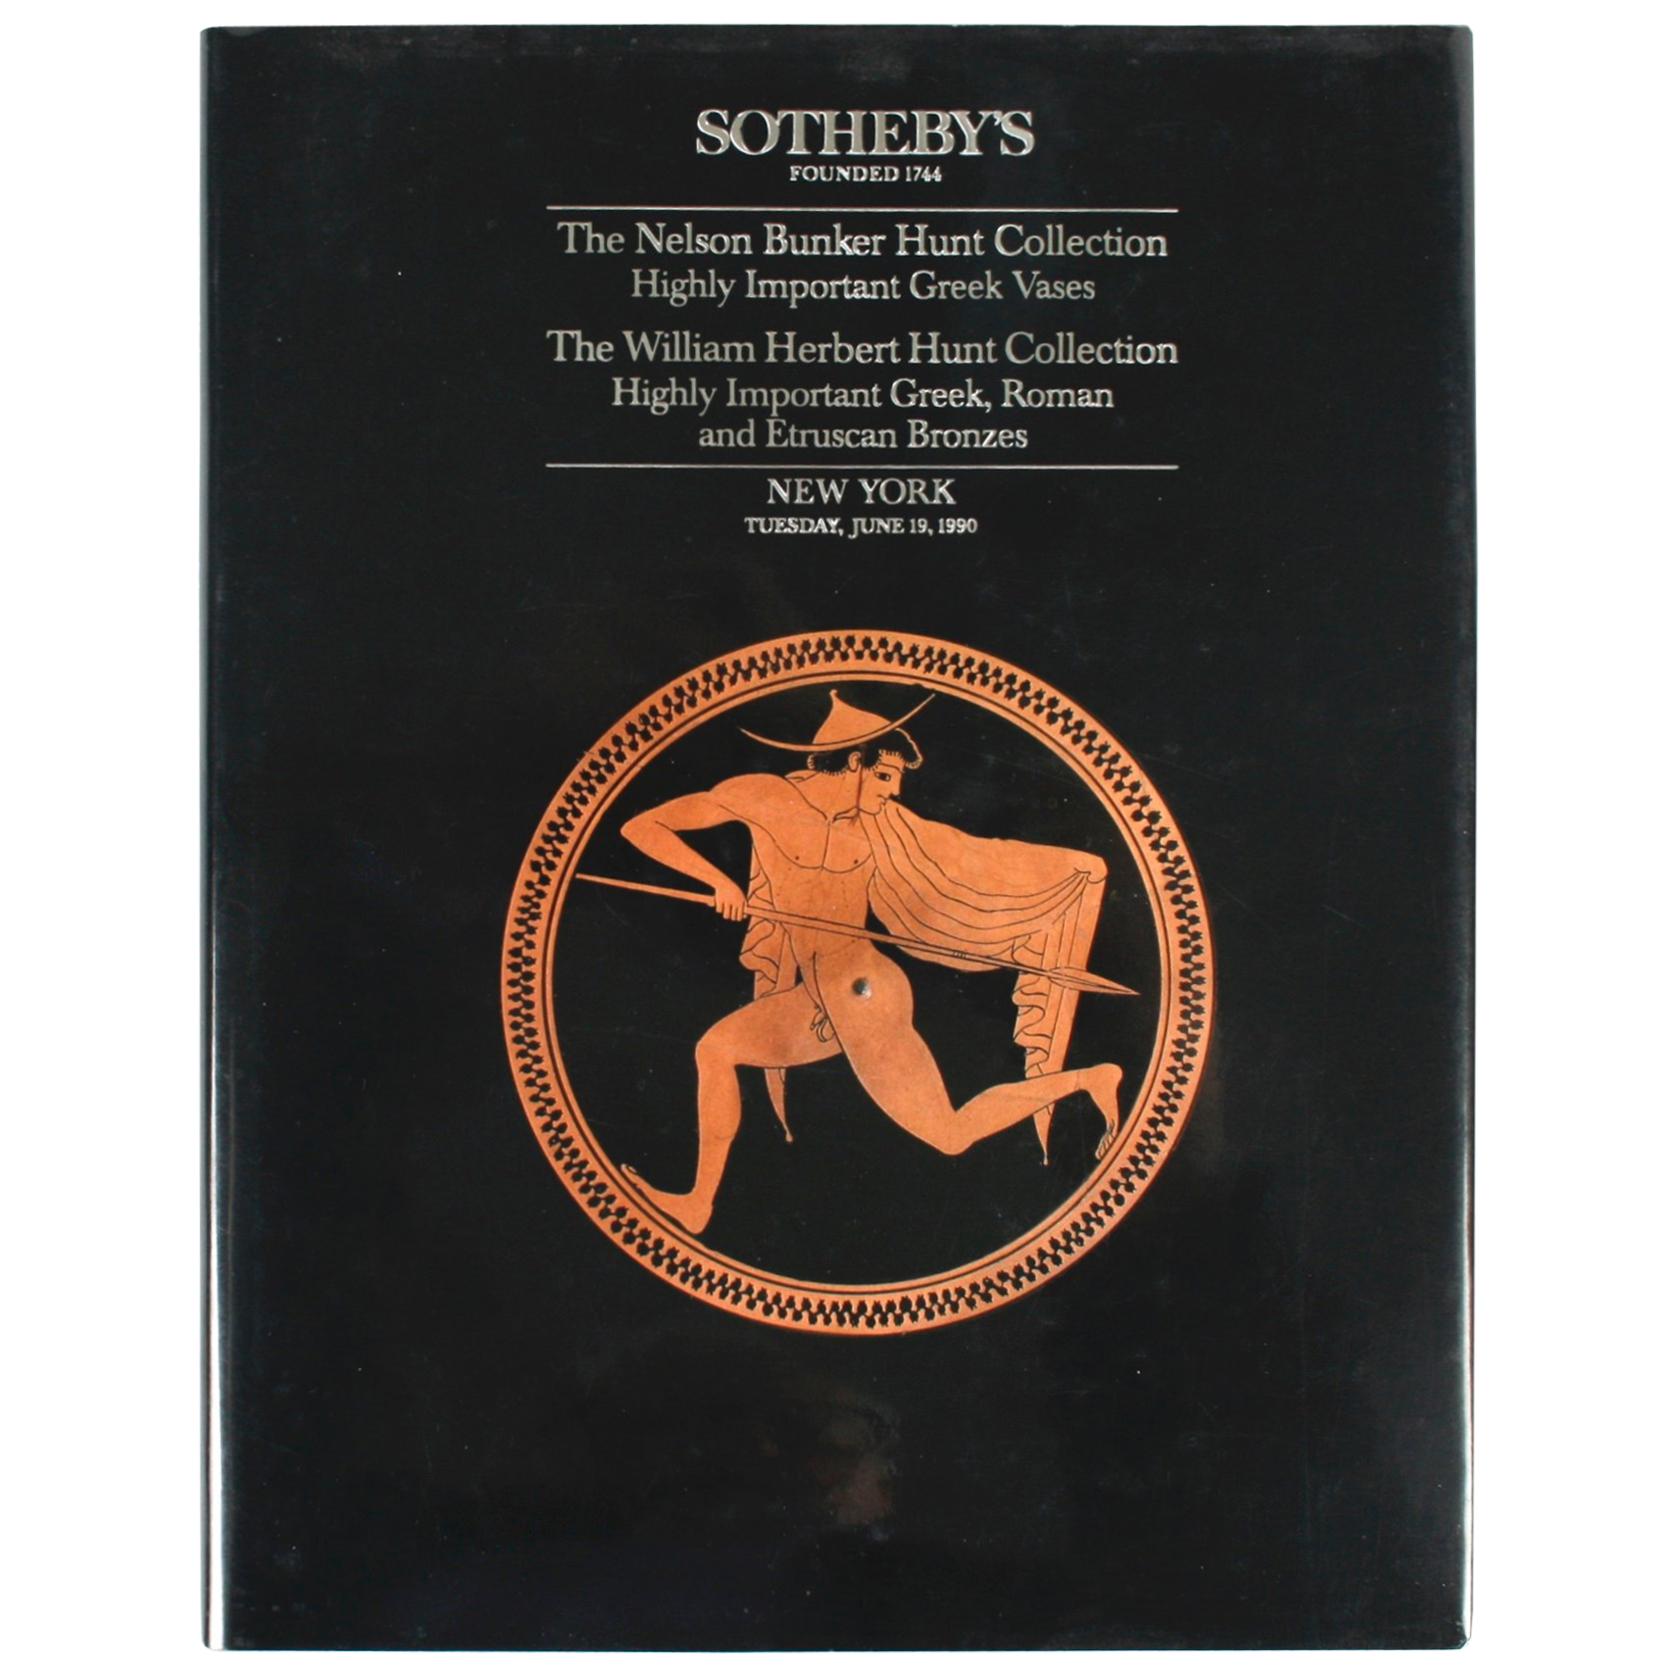 Sotheby's, Hunt Collection Highly Important Greek Vases Roman & Etruscan Bronzes